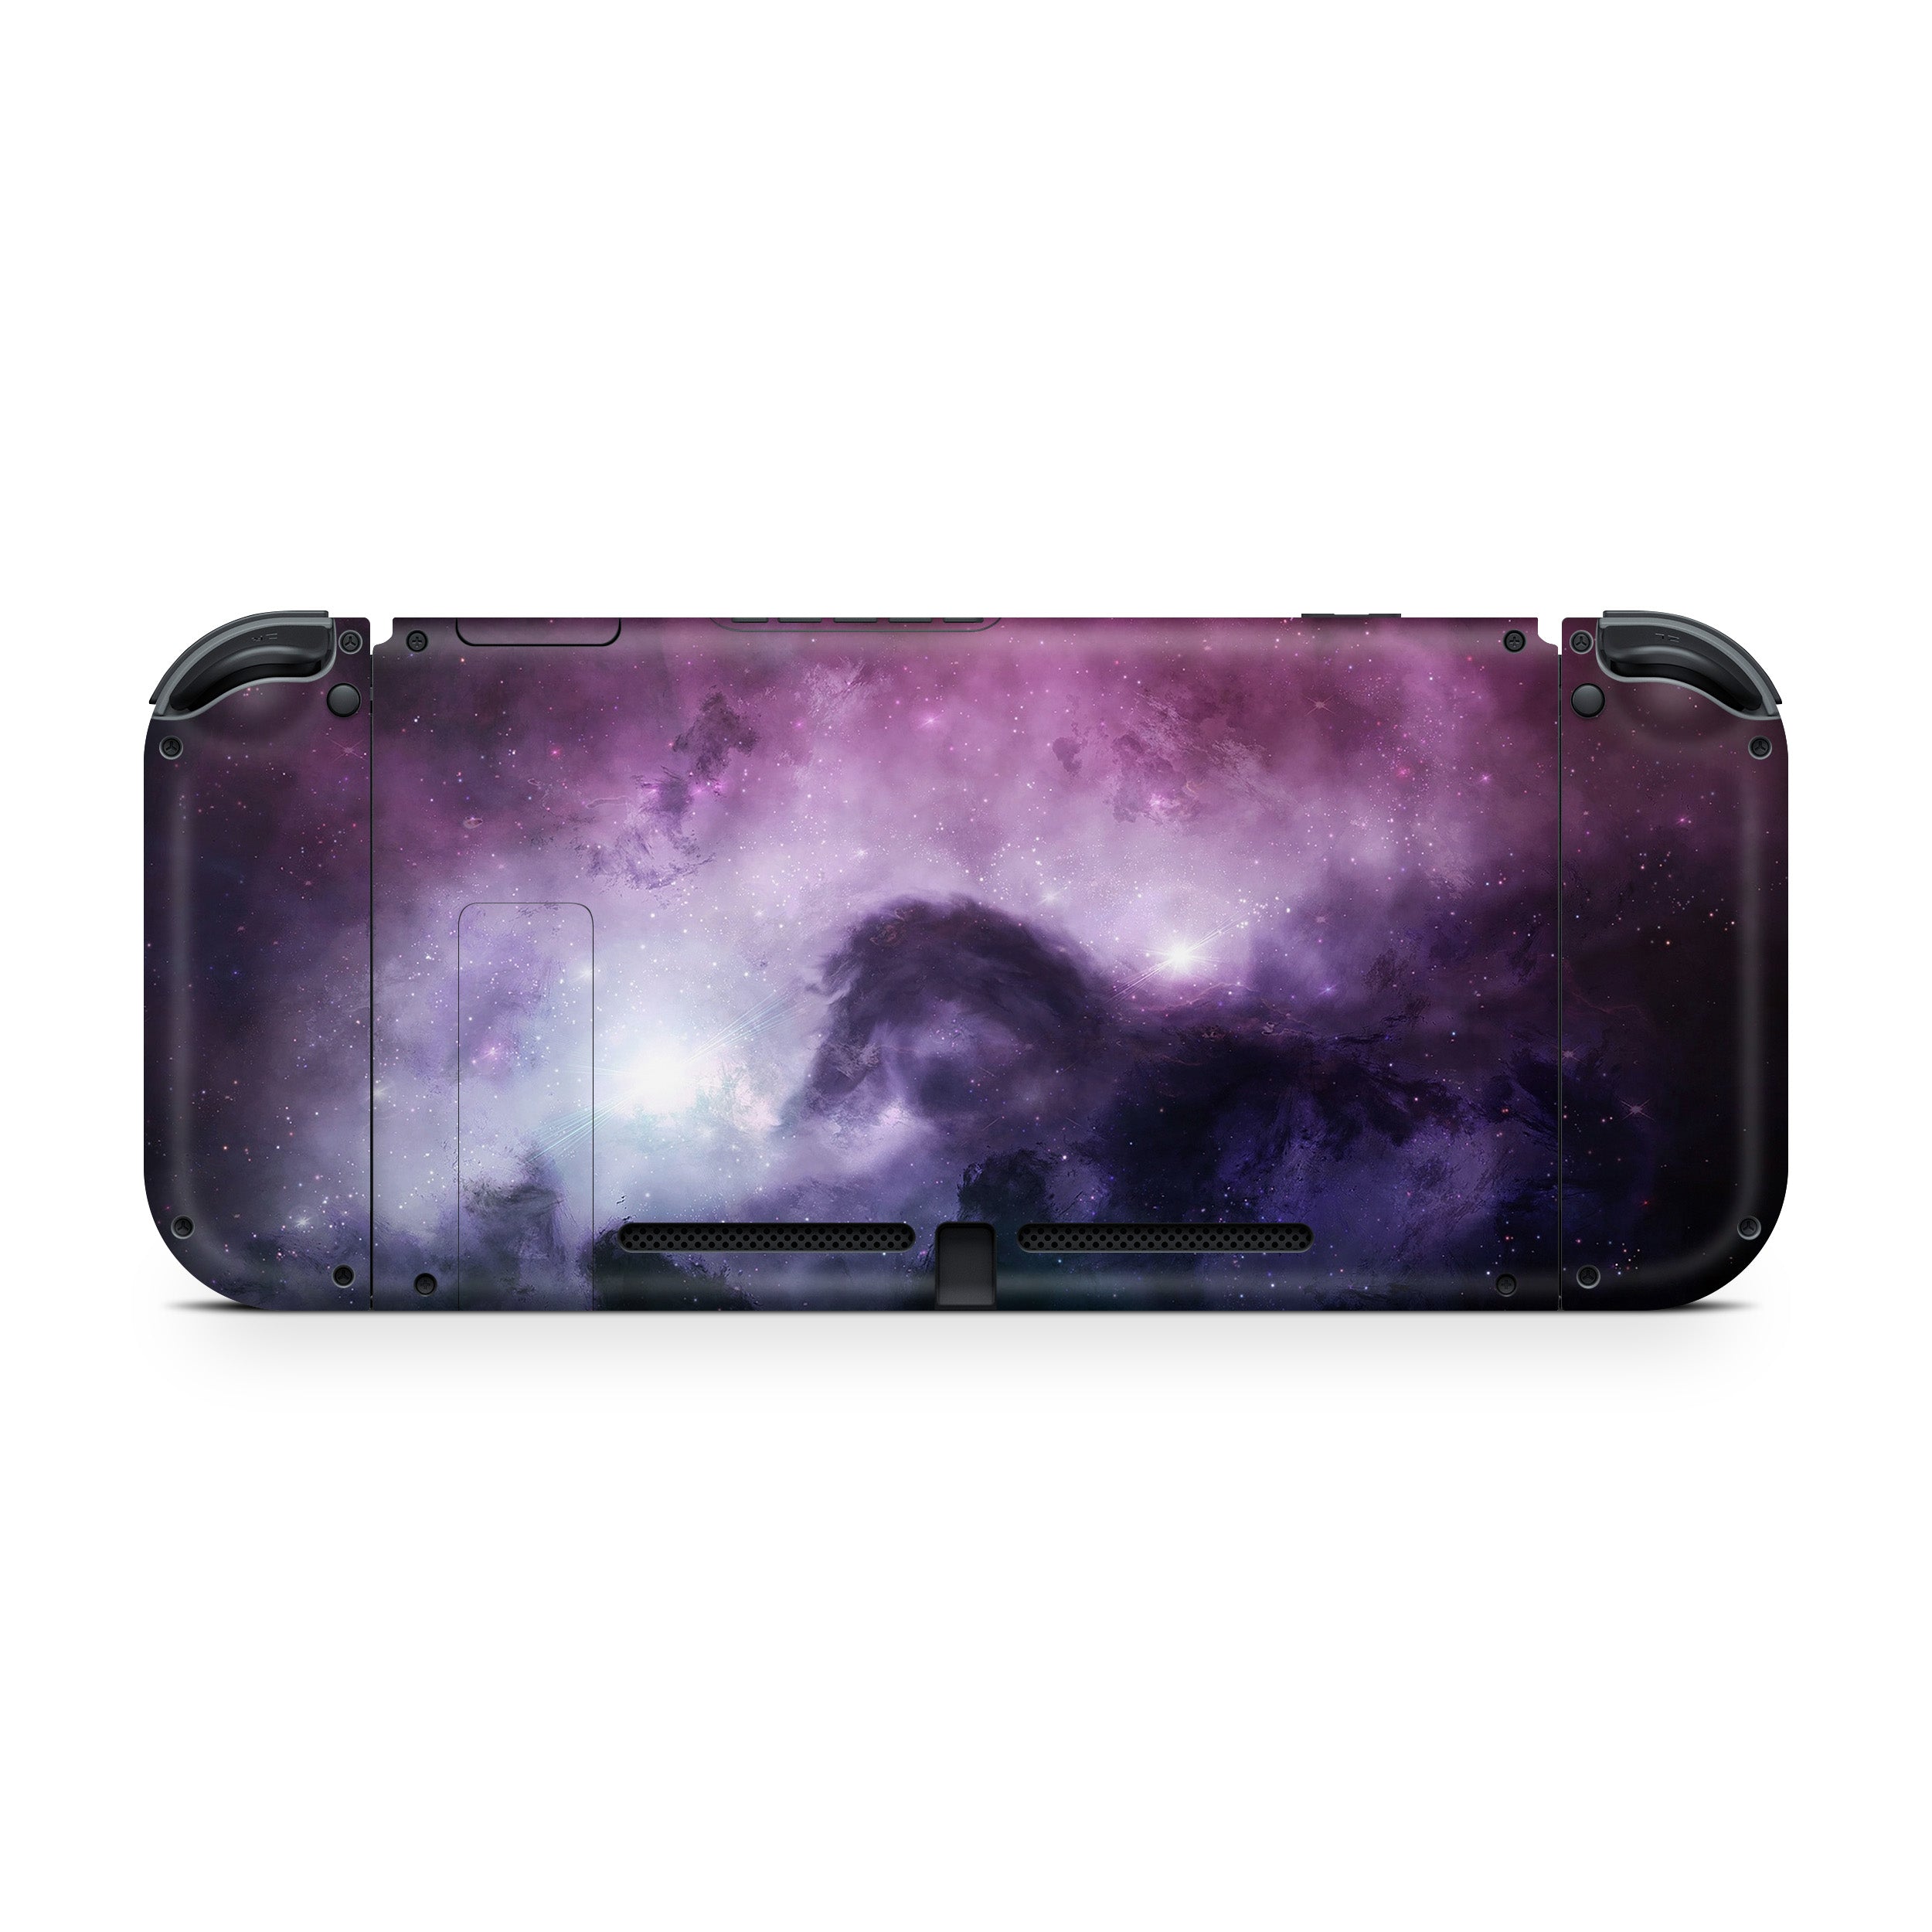 A video game skin featuring a Space design for the Nintendo Switch.